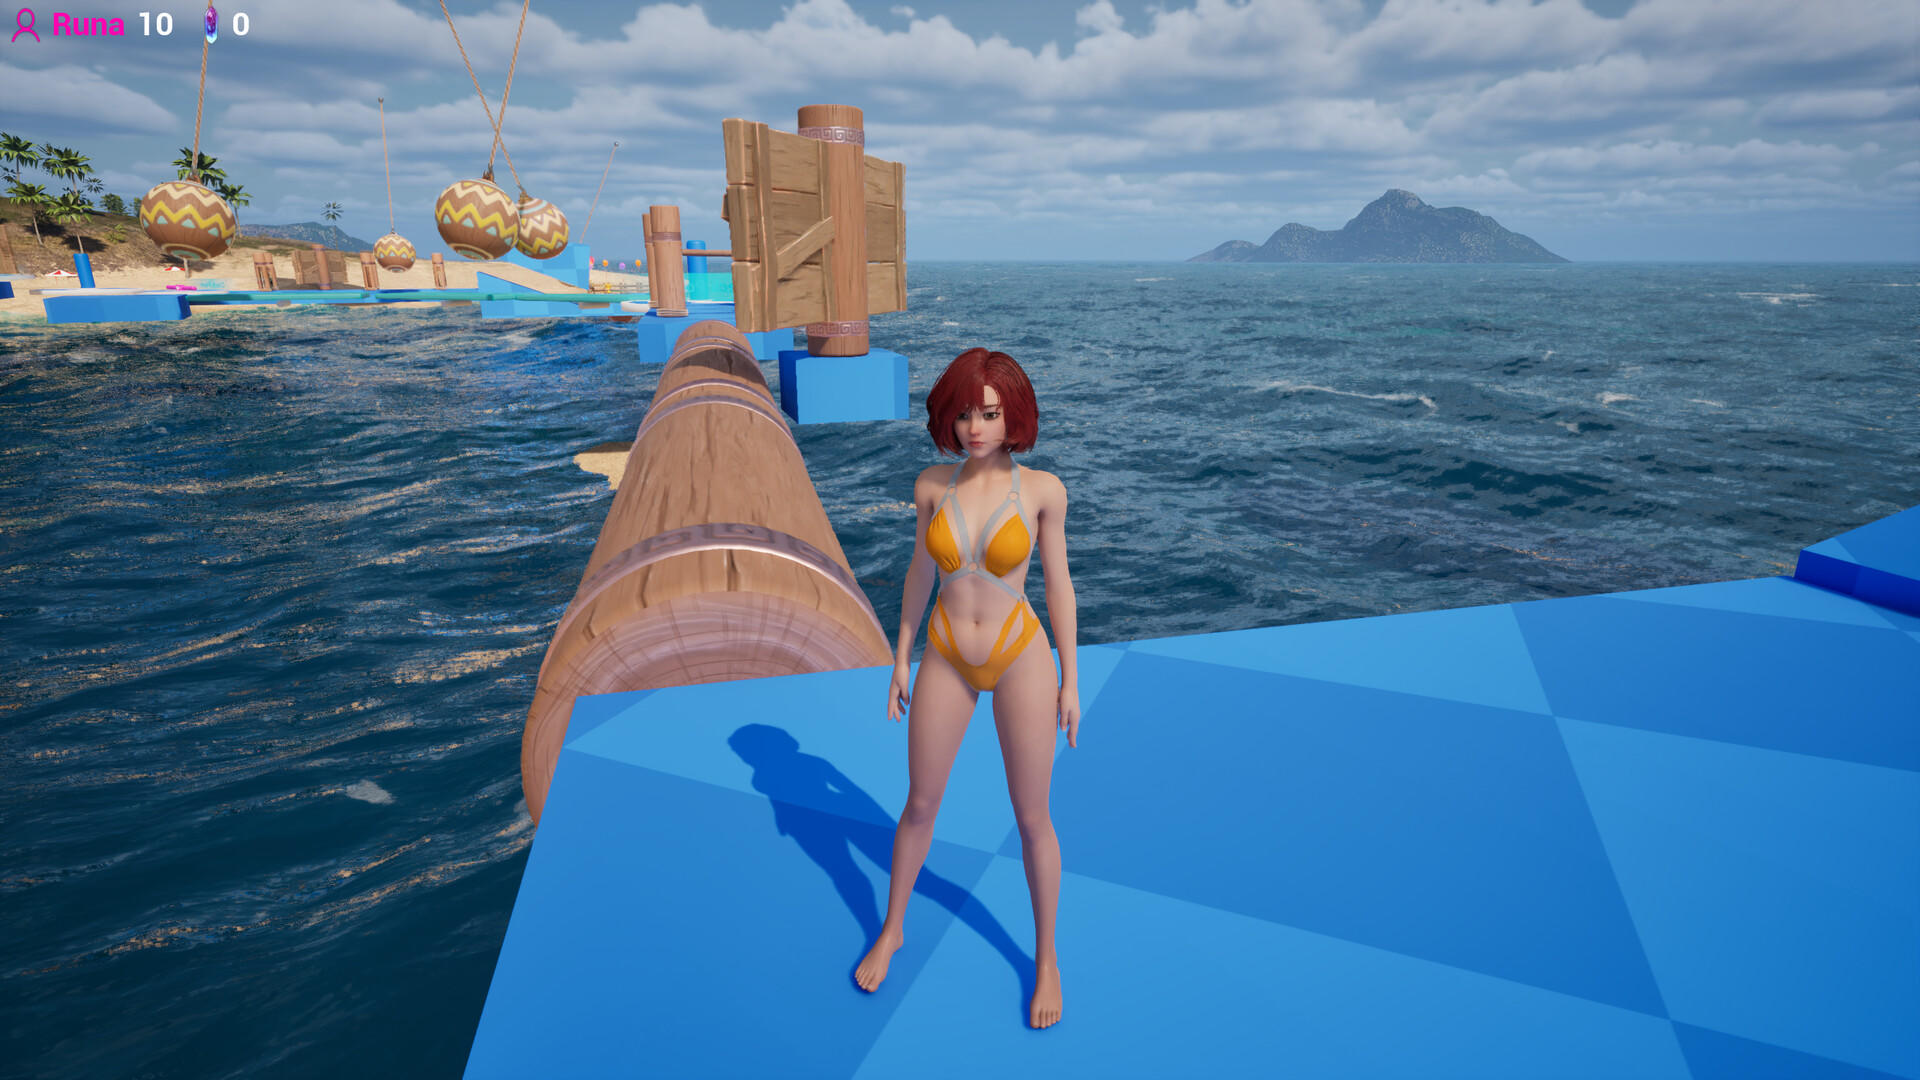 Beauty Girl Chronicles: Island Obstacle Challenge screenshot game